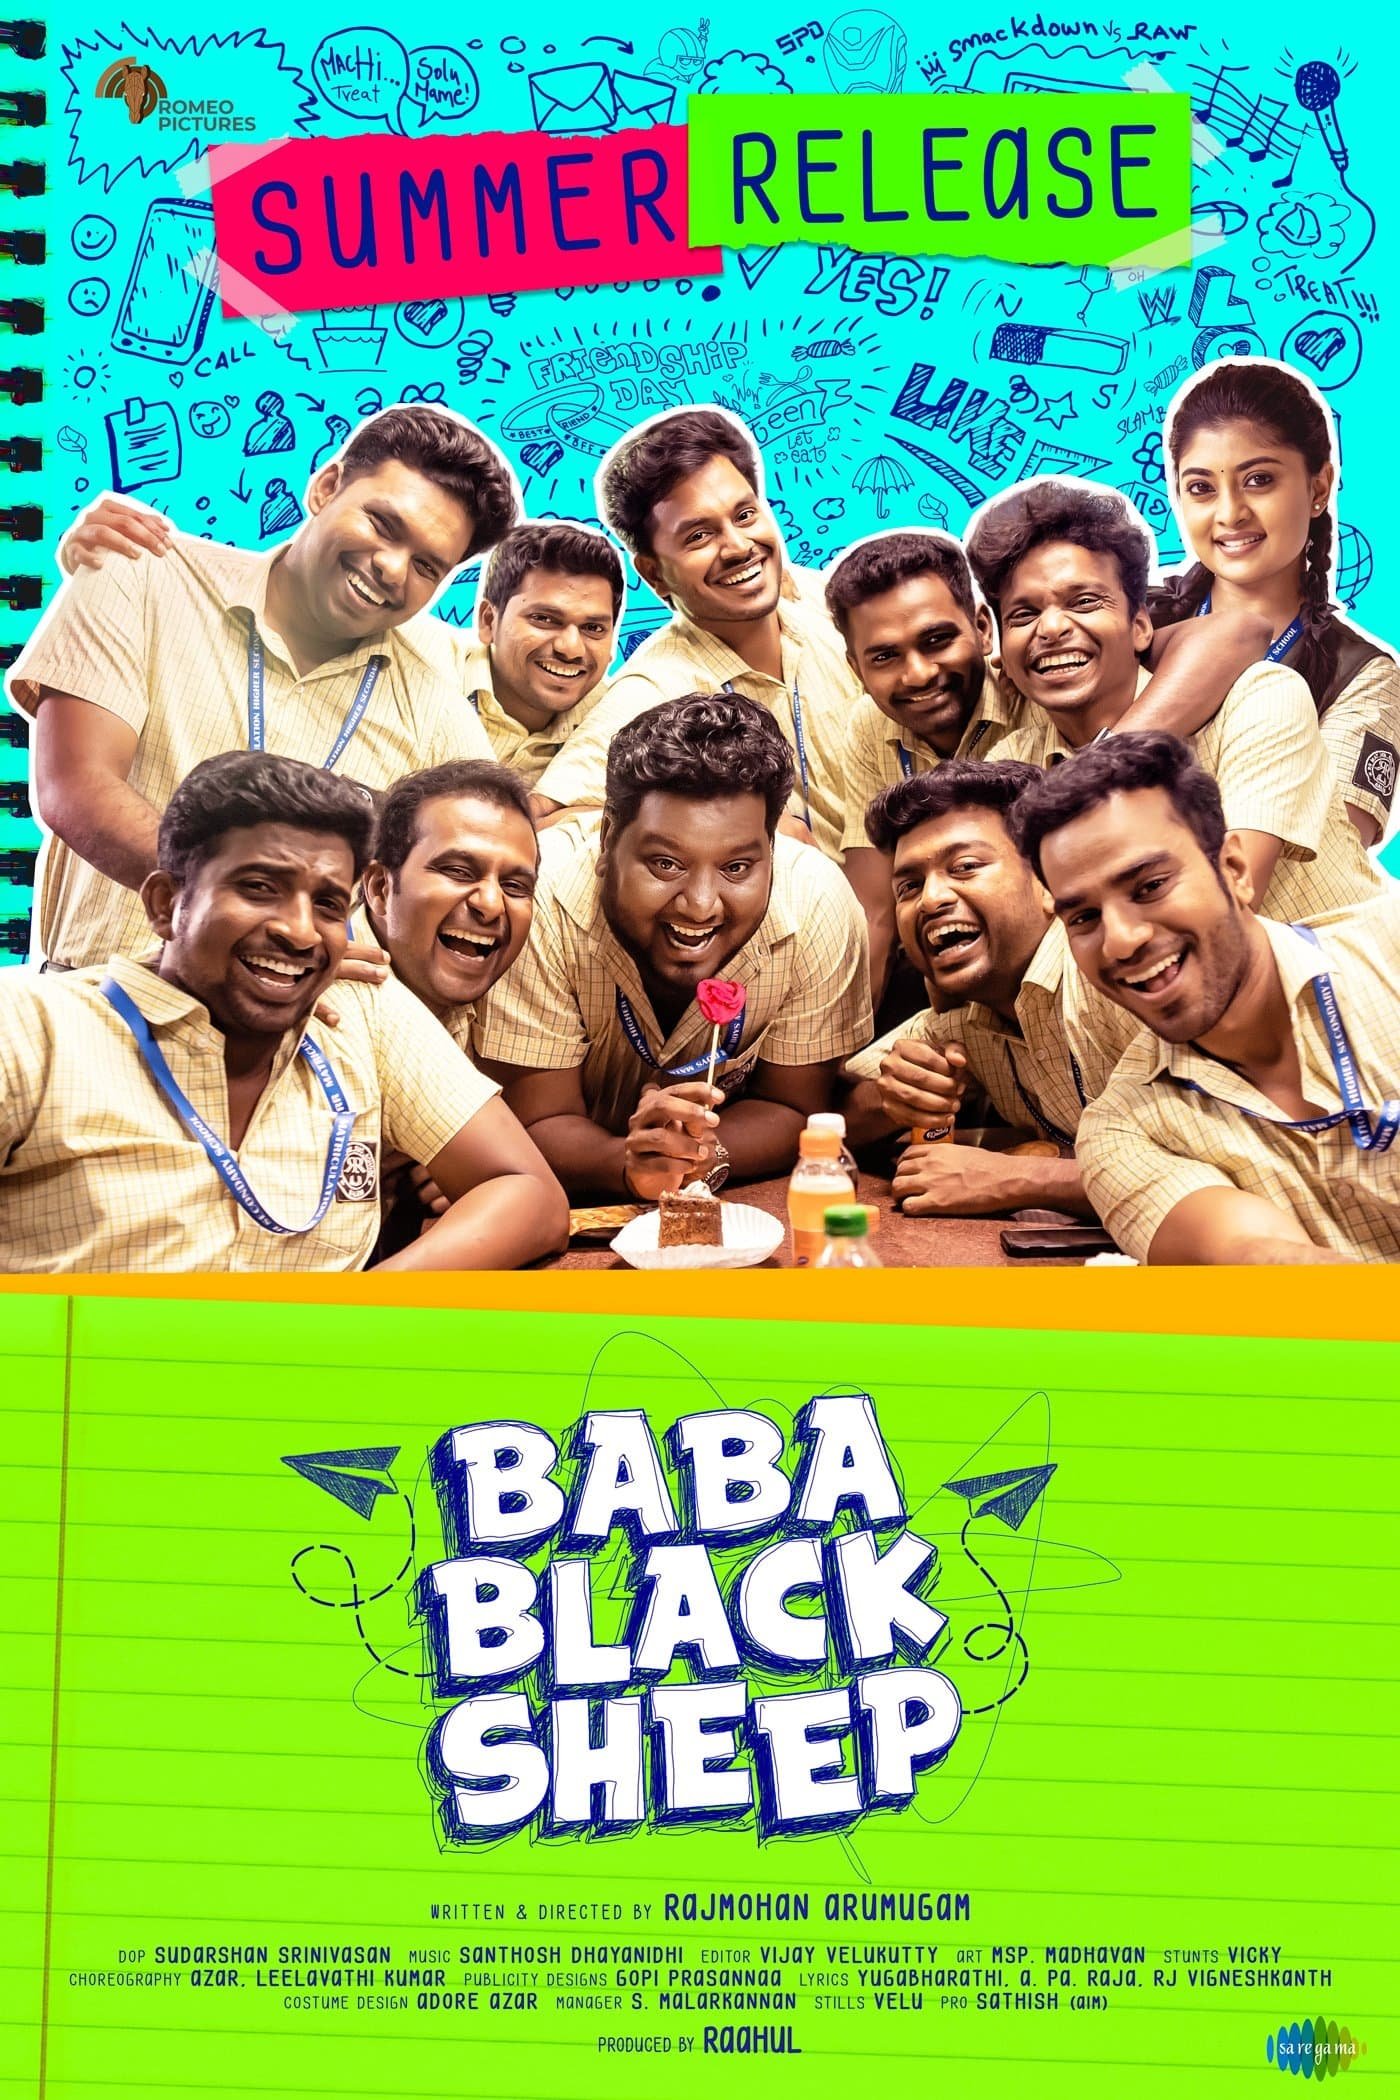 Poster for the movie "Baba Black Sheep"